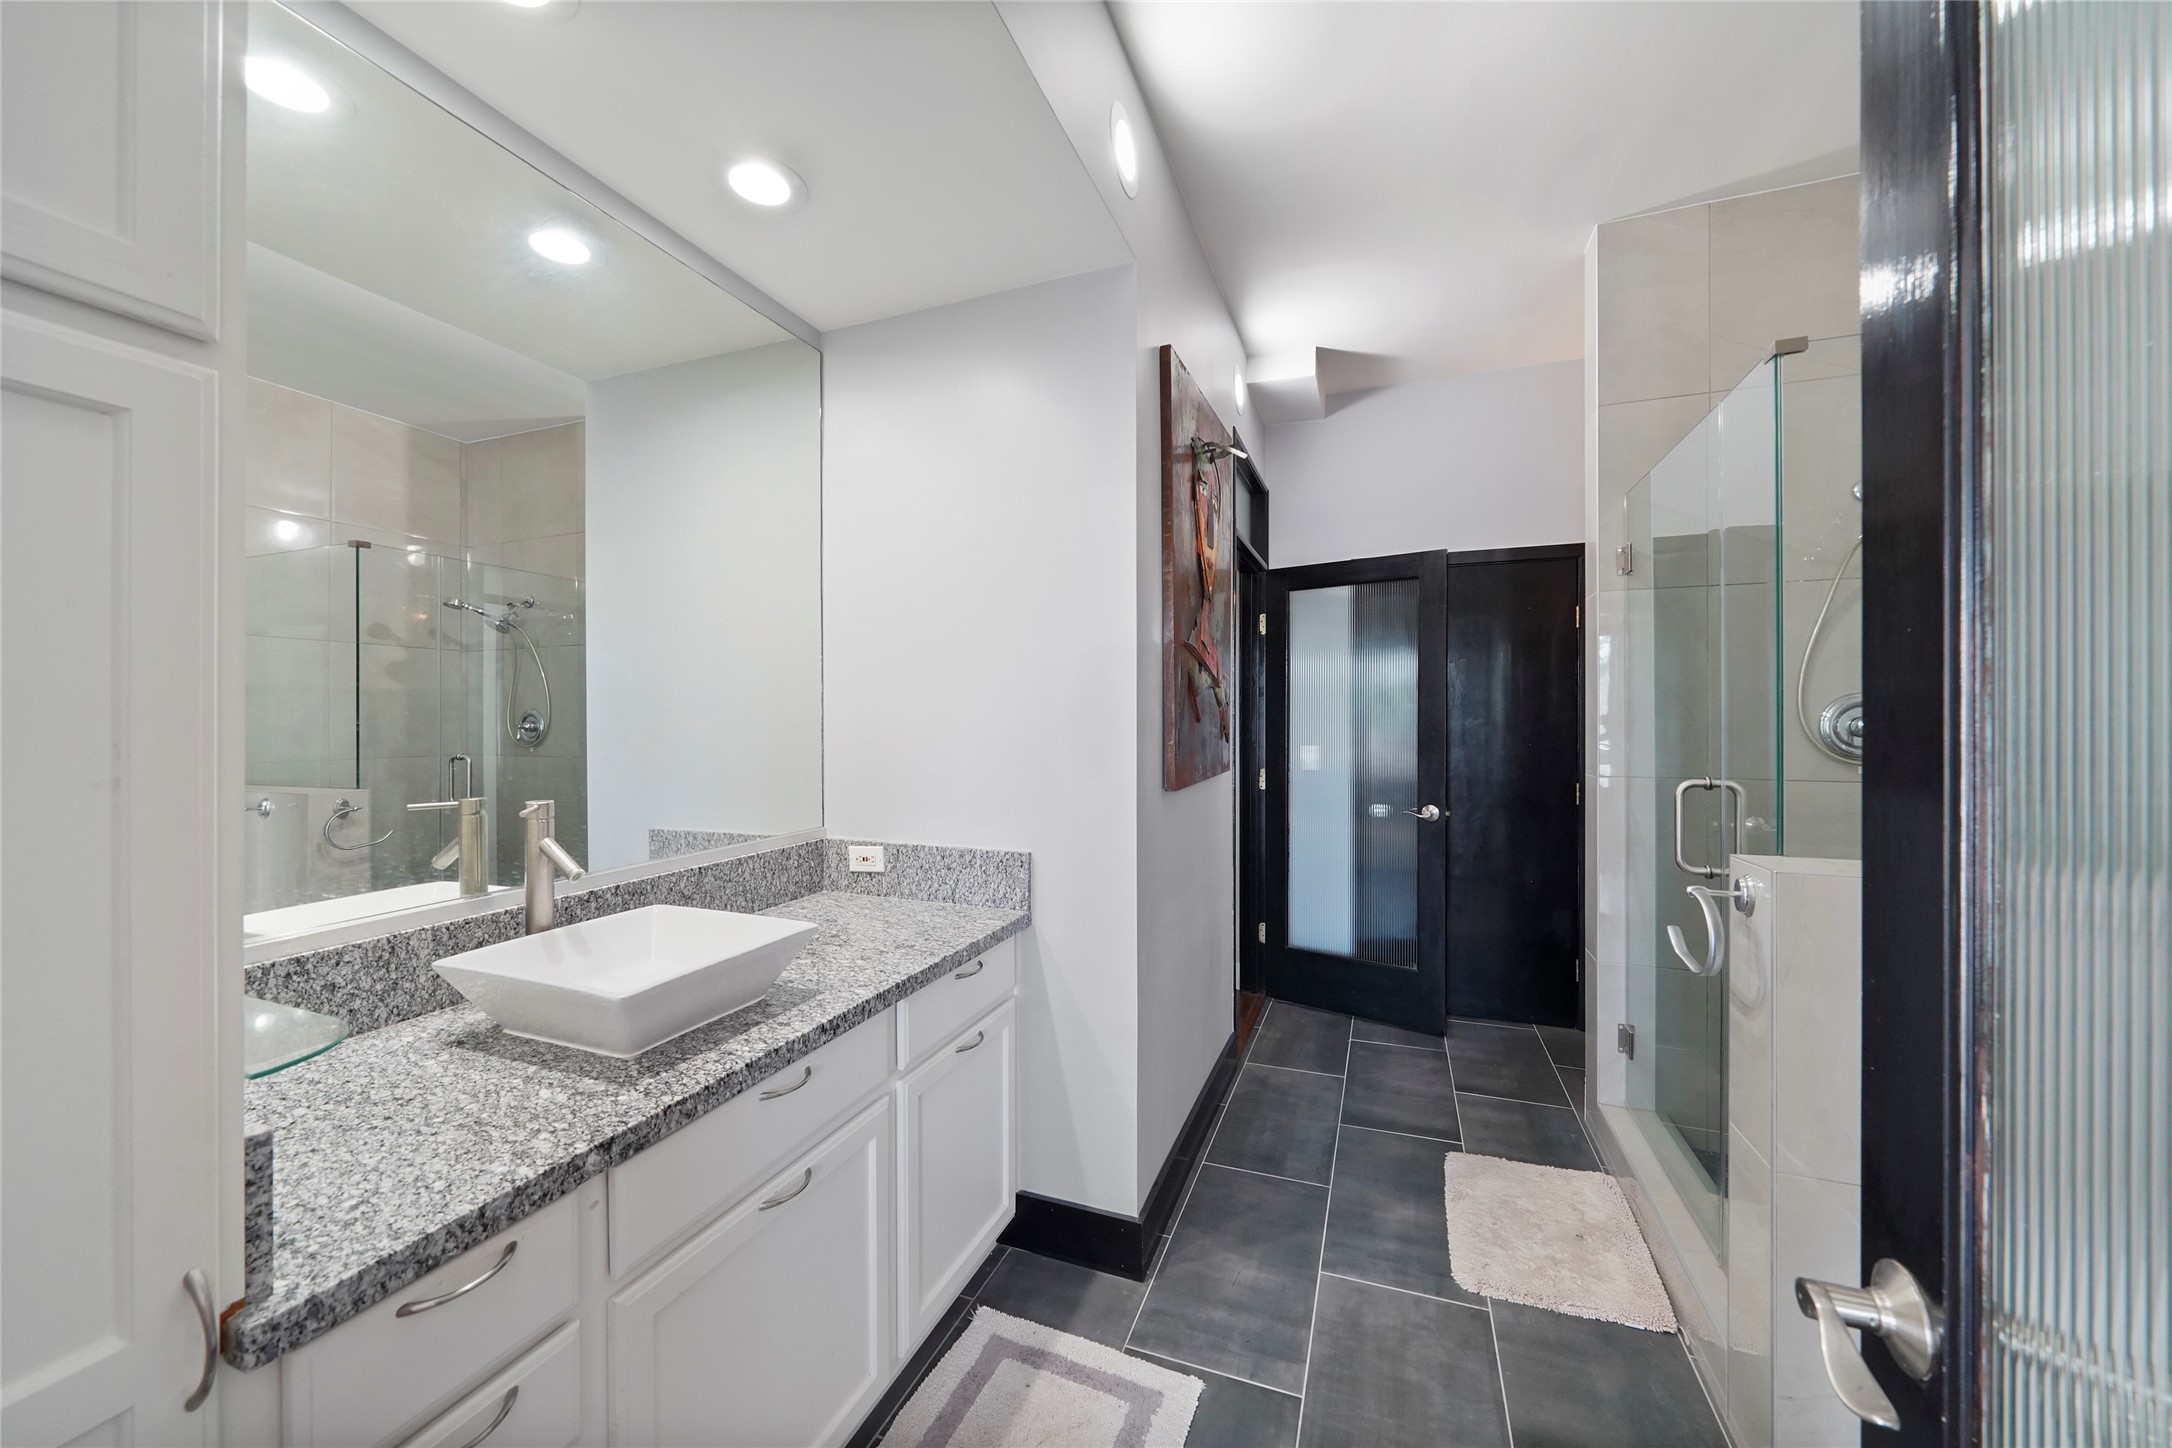 The primary bathroom was completely remodeled approximately 2 years ago.